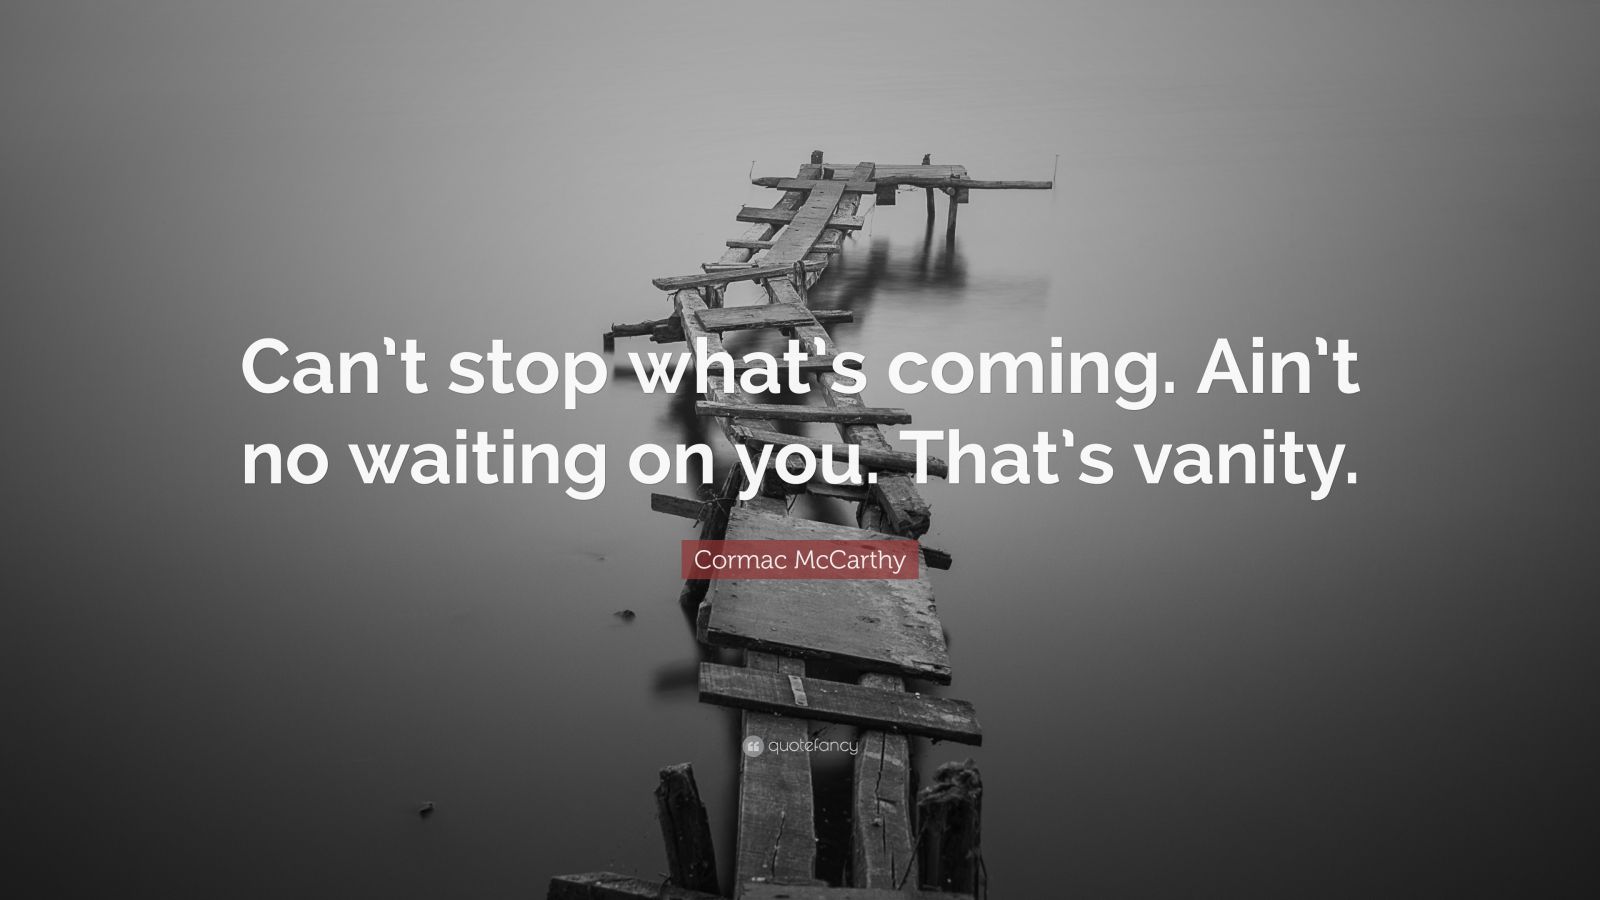 Cormac Mccarthy Quote Can T Stop What S Coming Ain T No Waiting On You That S Vanity